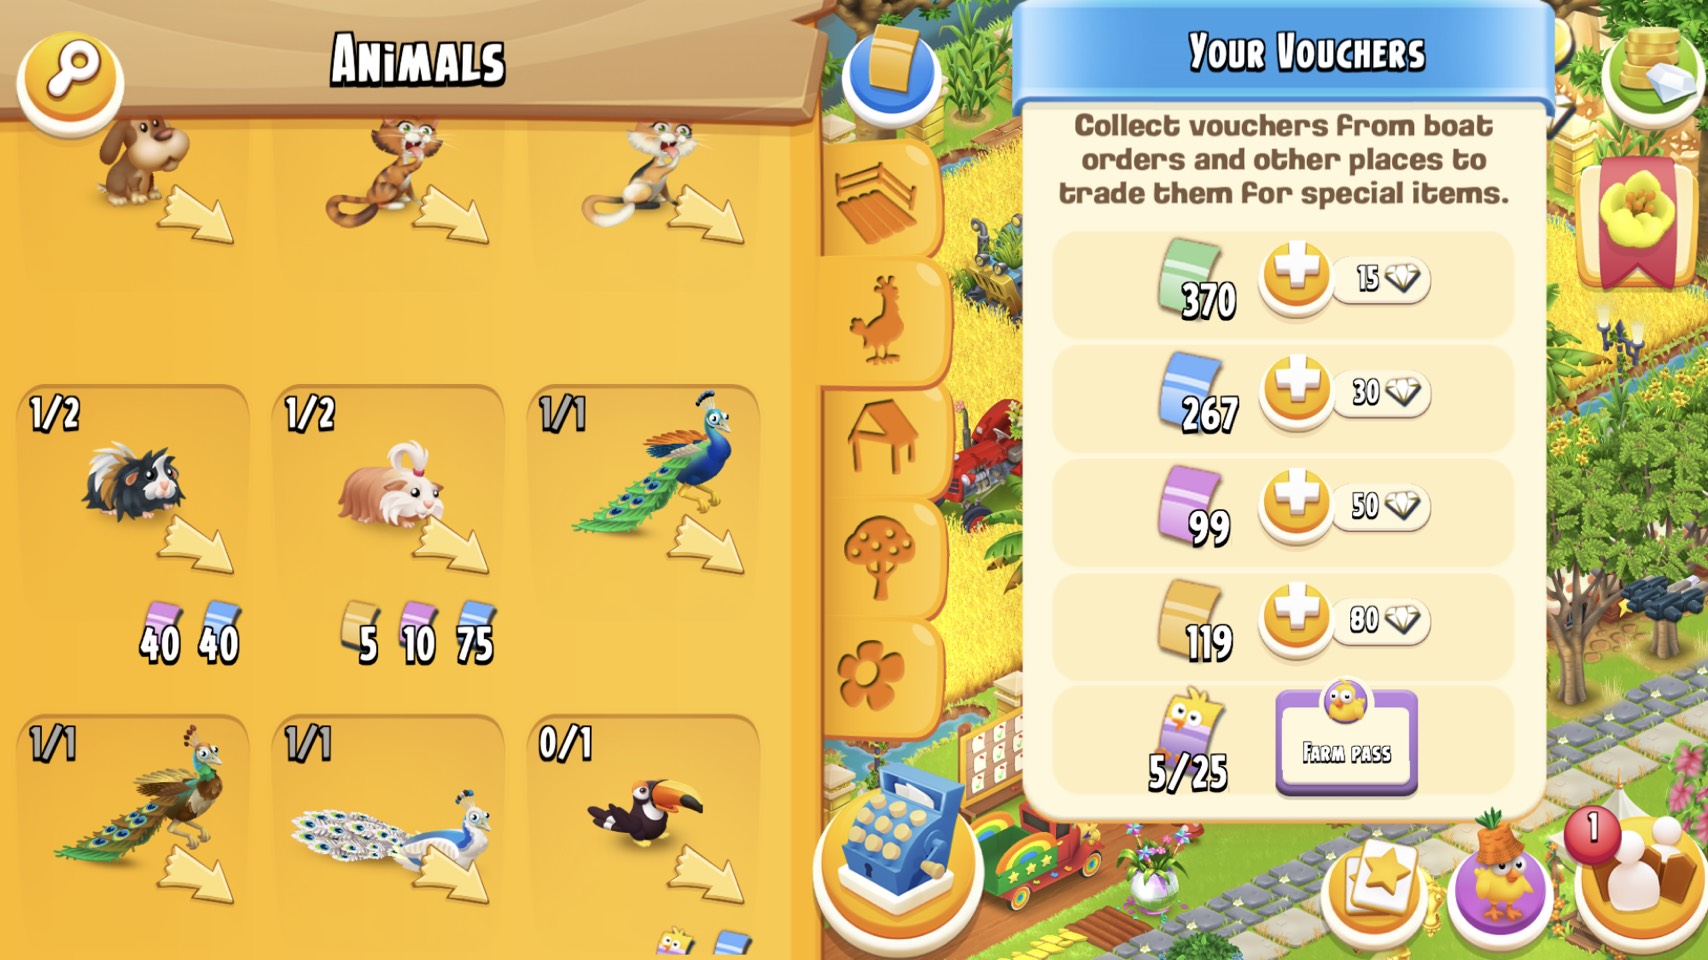 Level 92 good price, has Hayday lettering. Available 21m coins + 800 vouchers. Barn 5150+silo 2650. Level 16 town with lots of animals. 